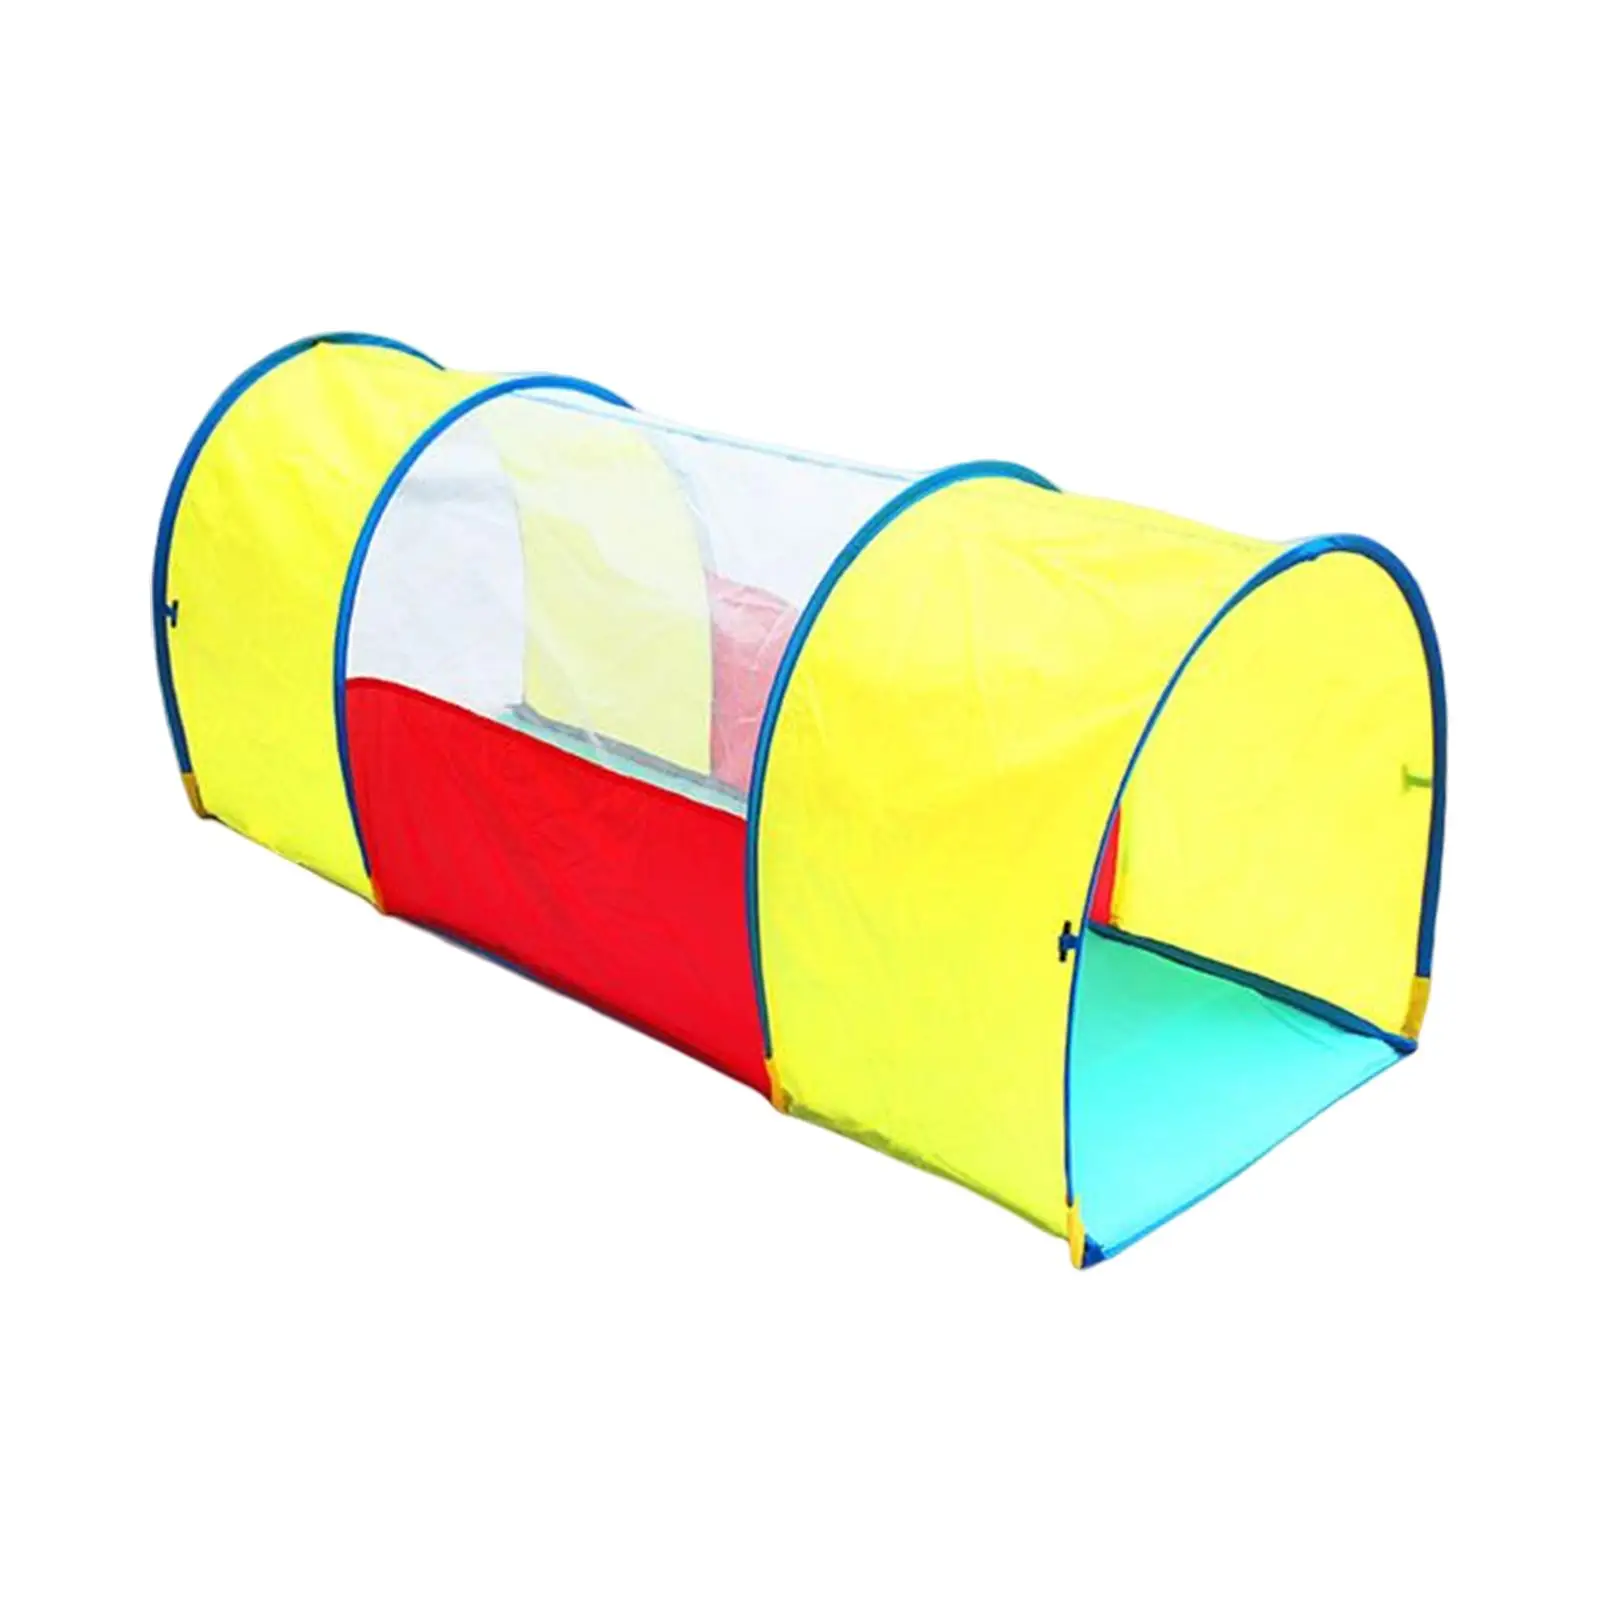 Breathable Kids Play Tunnel Tent Indoor Outdoor Game for Children Girls Boys